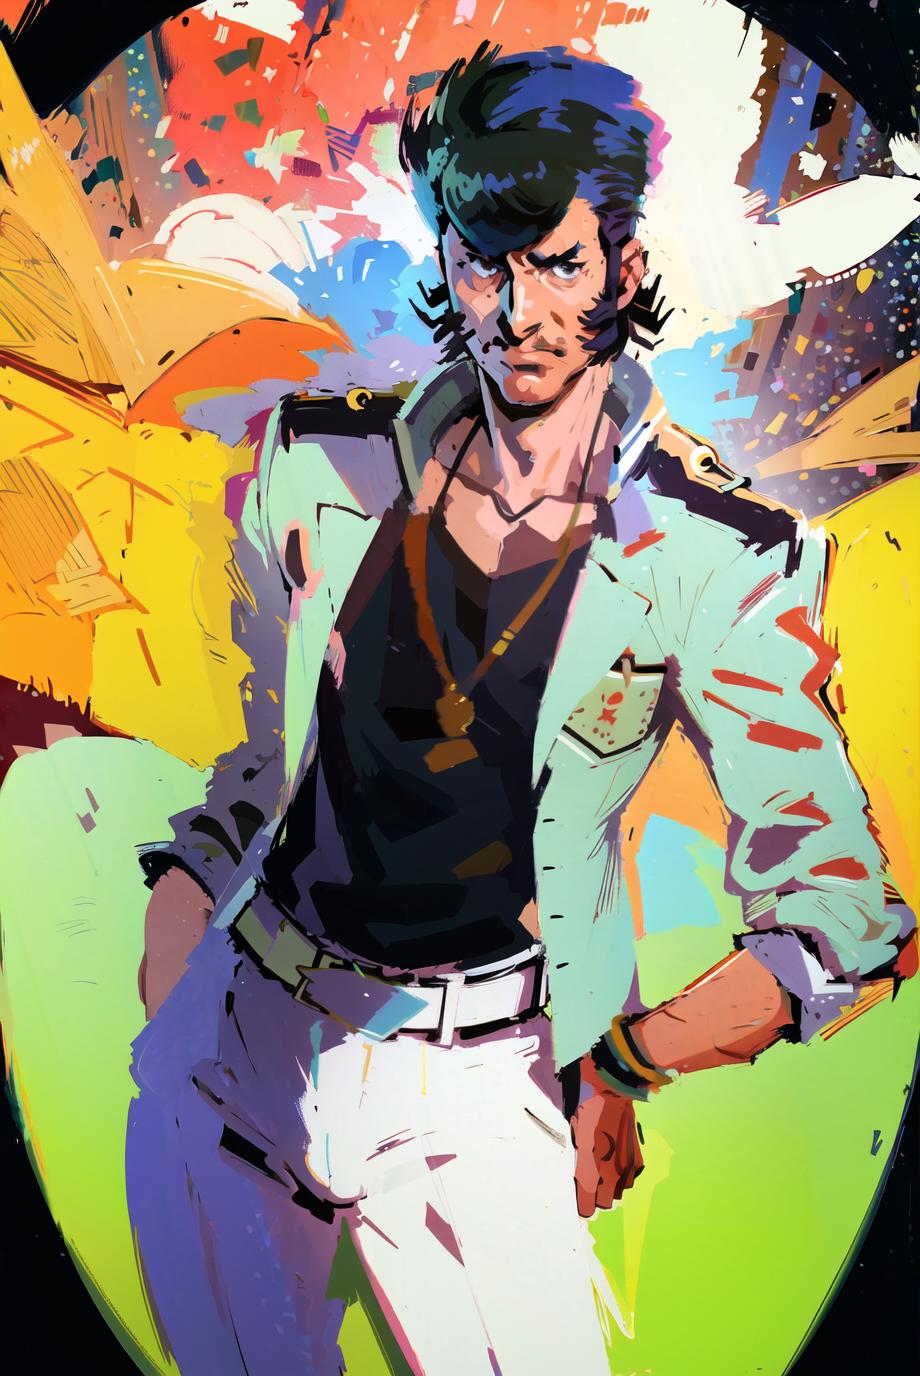 Dandy ( Space Dandy ) image by Domino